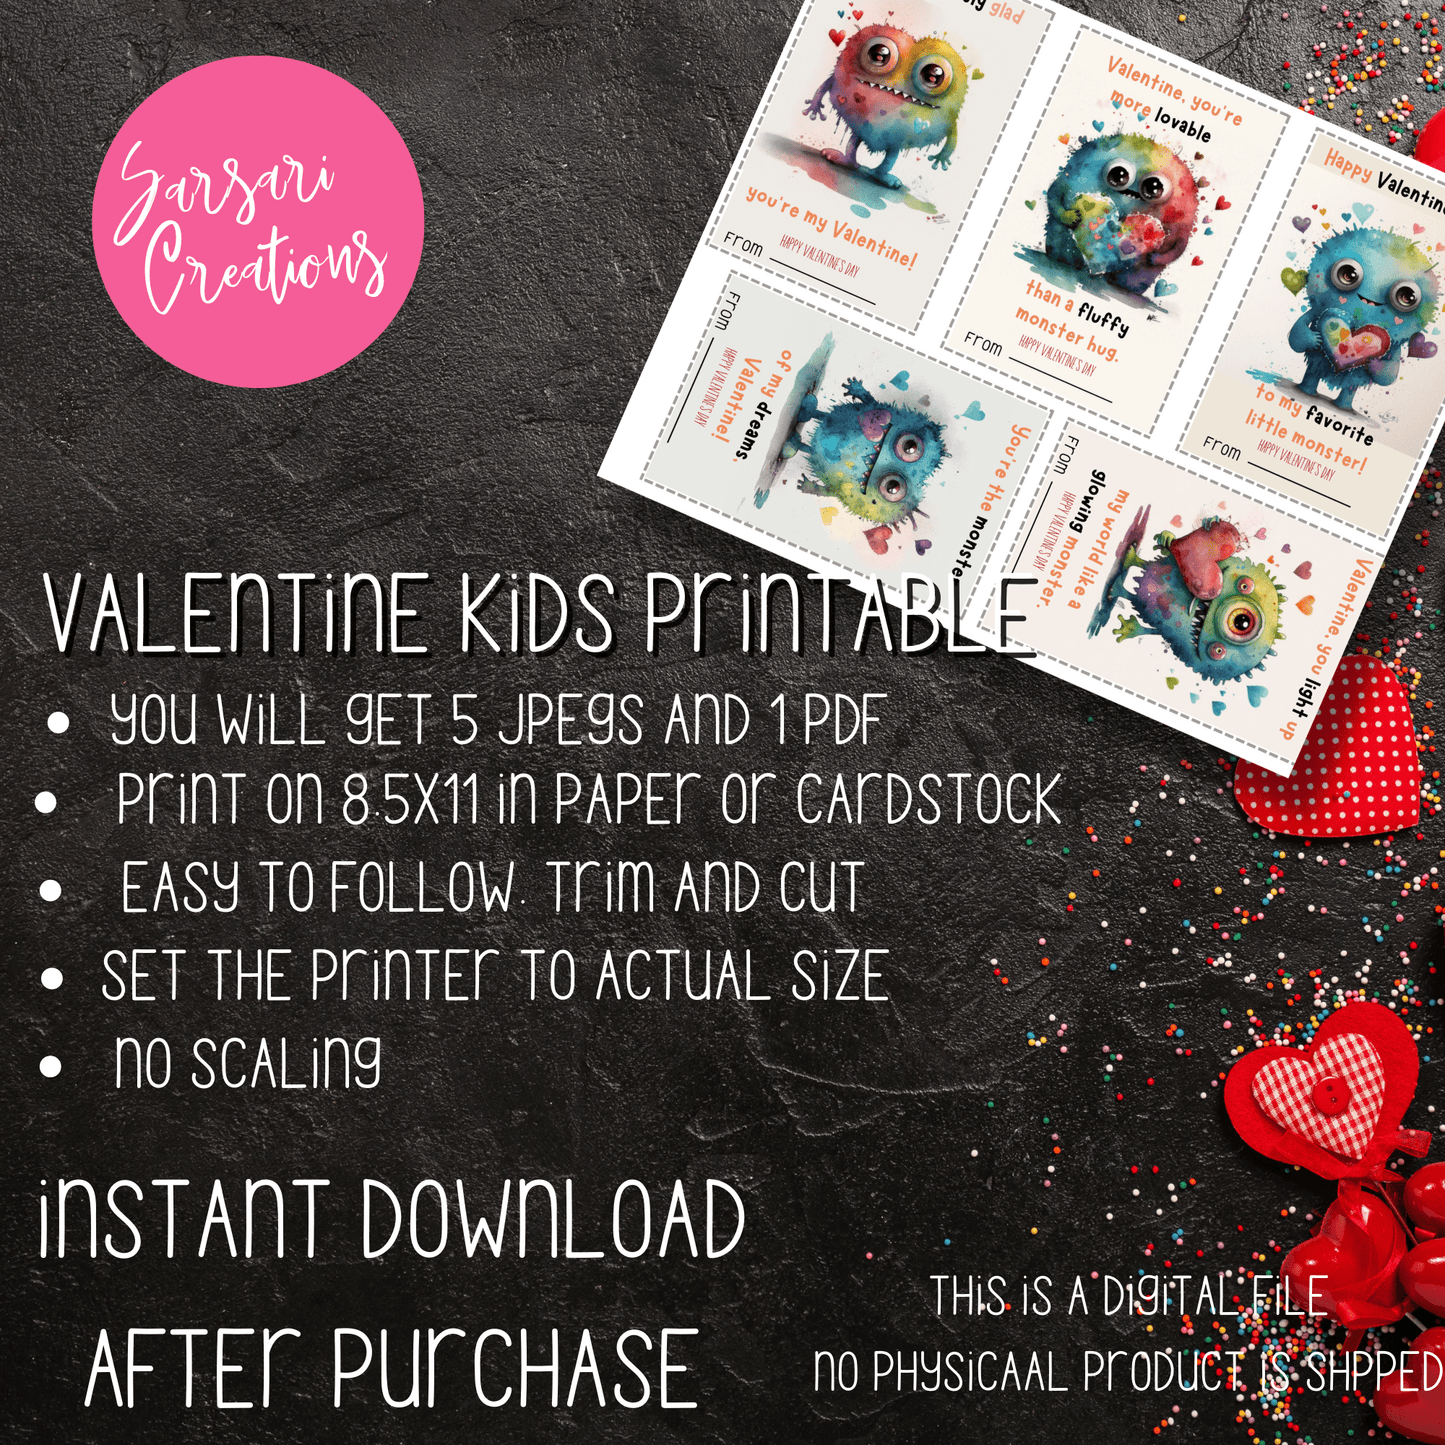 Make Valentine's Day Spooktacular with Printable Monster Cards and Gift Tags - Instant Download #V21